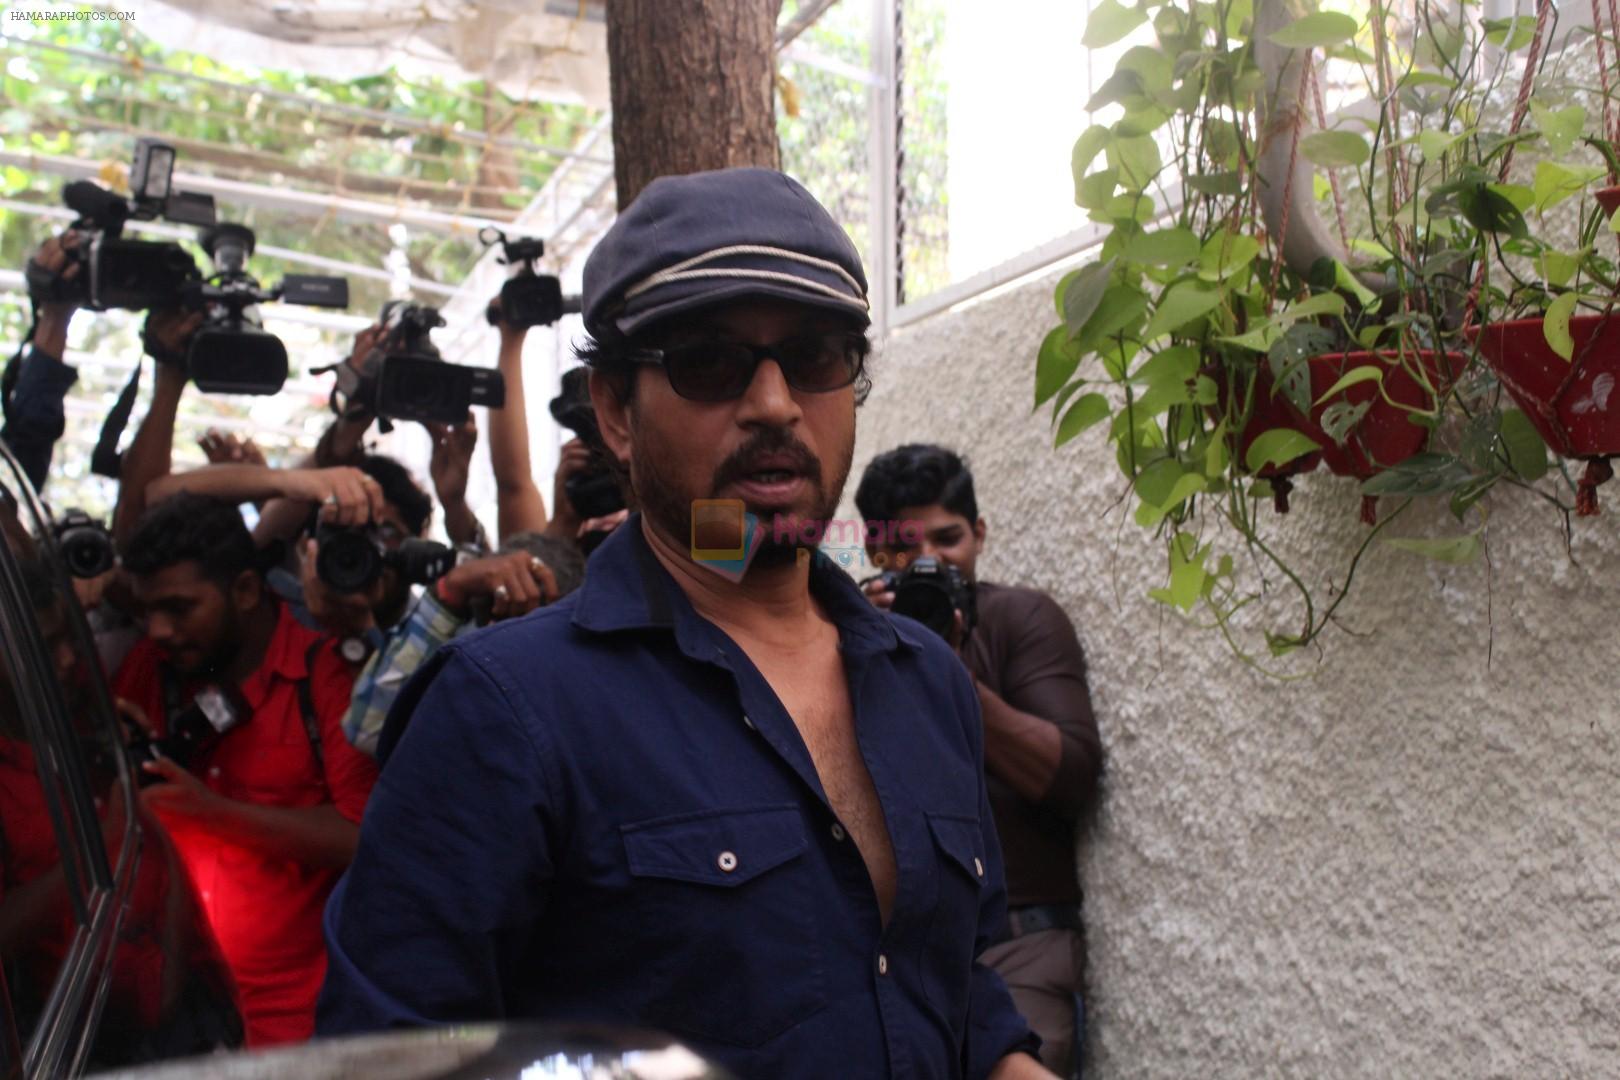 Irrfan Khan Spotted at Sunny Super Sound on 30th March 2017